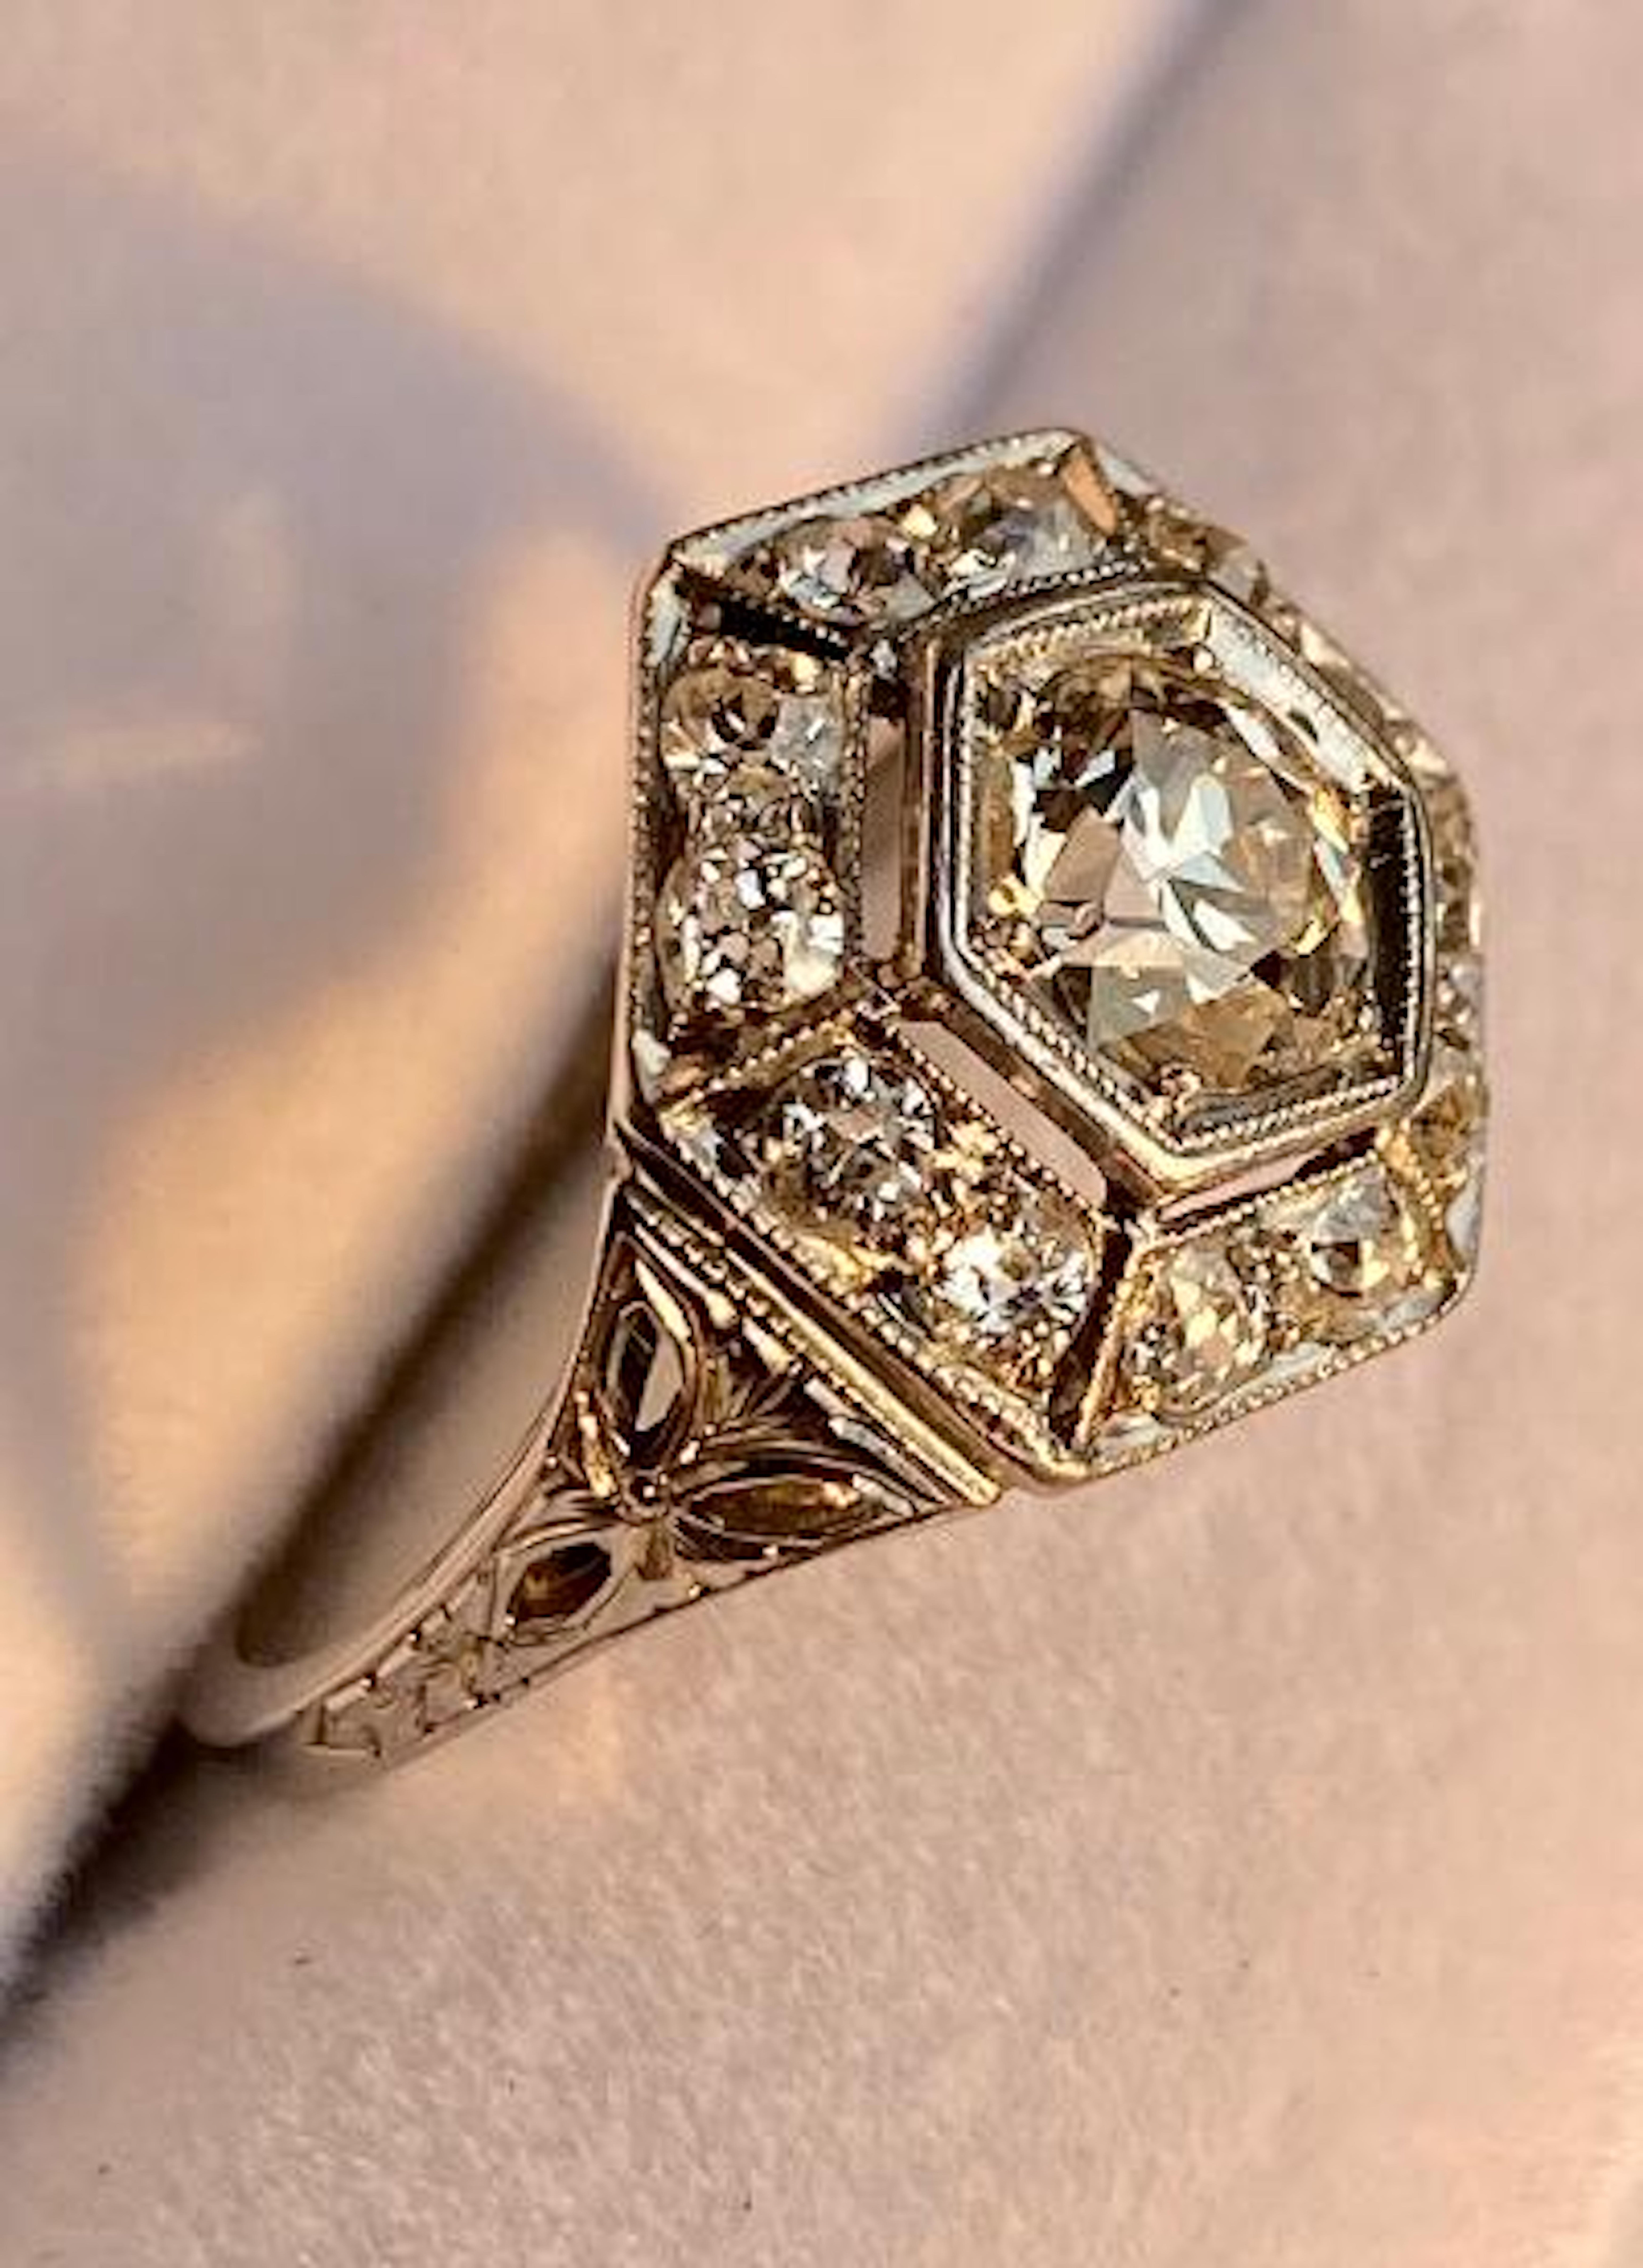 Very elegant, hand made, ladies vintage Art Deco era diamond ring featuring a custom made hexagon design platinum mounting having the total combined weight of approximately 2.20 carats. The center stone is an approximately 1.00 carat Old European